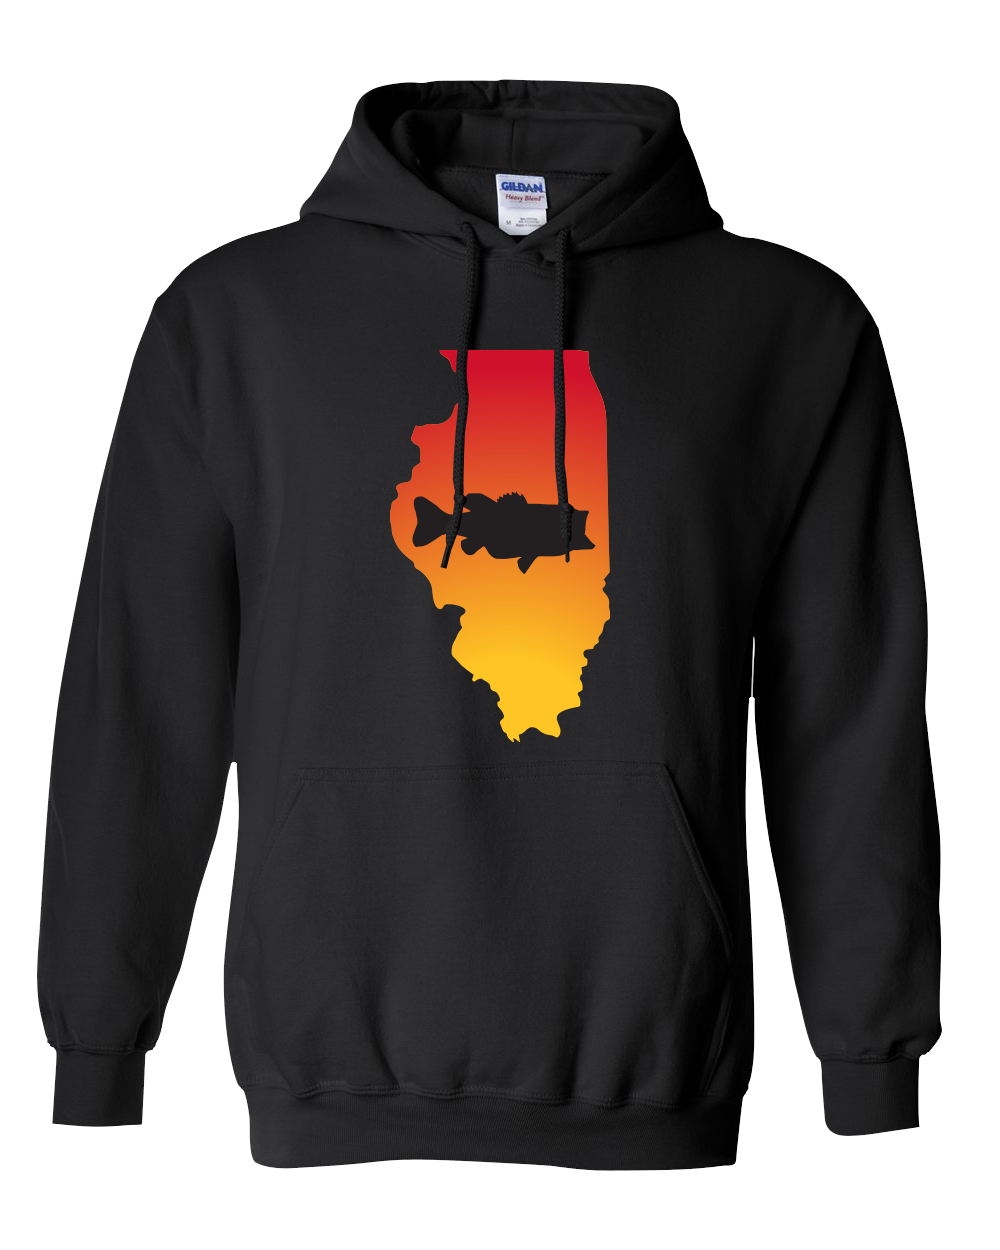 Pullover Hooded Sweatshirt Illinois Black Large Mouth Bass Vibrant Design High Quality Tight Knit Ring Spun Low Maintenance Cotton Printed With The Newest Available Color Transfer Technology